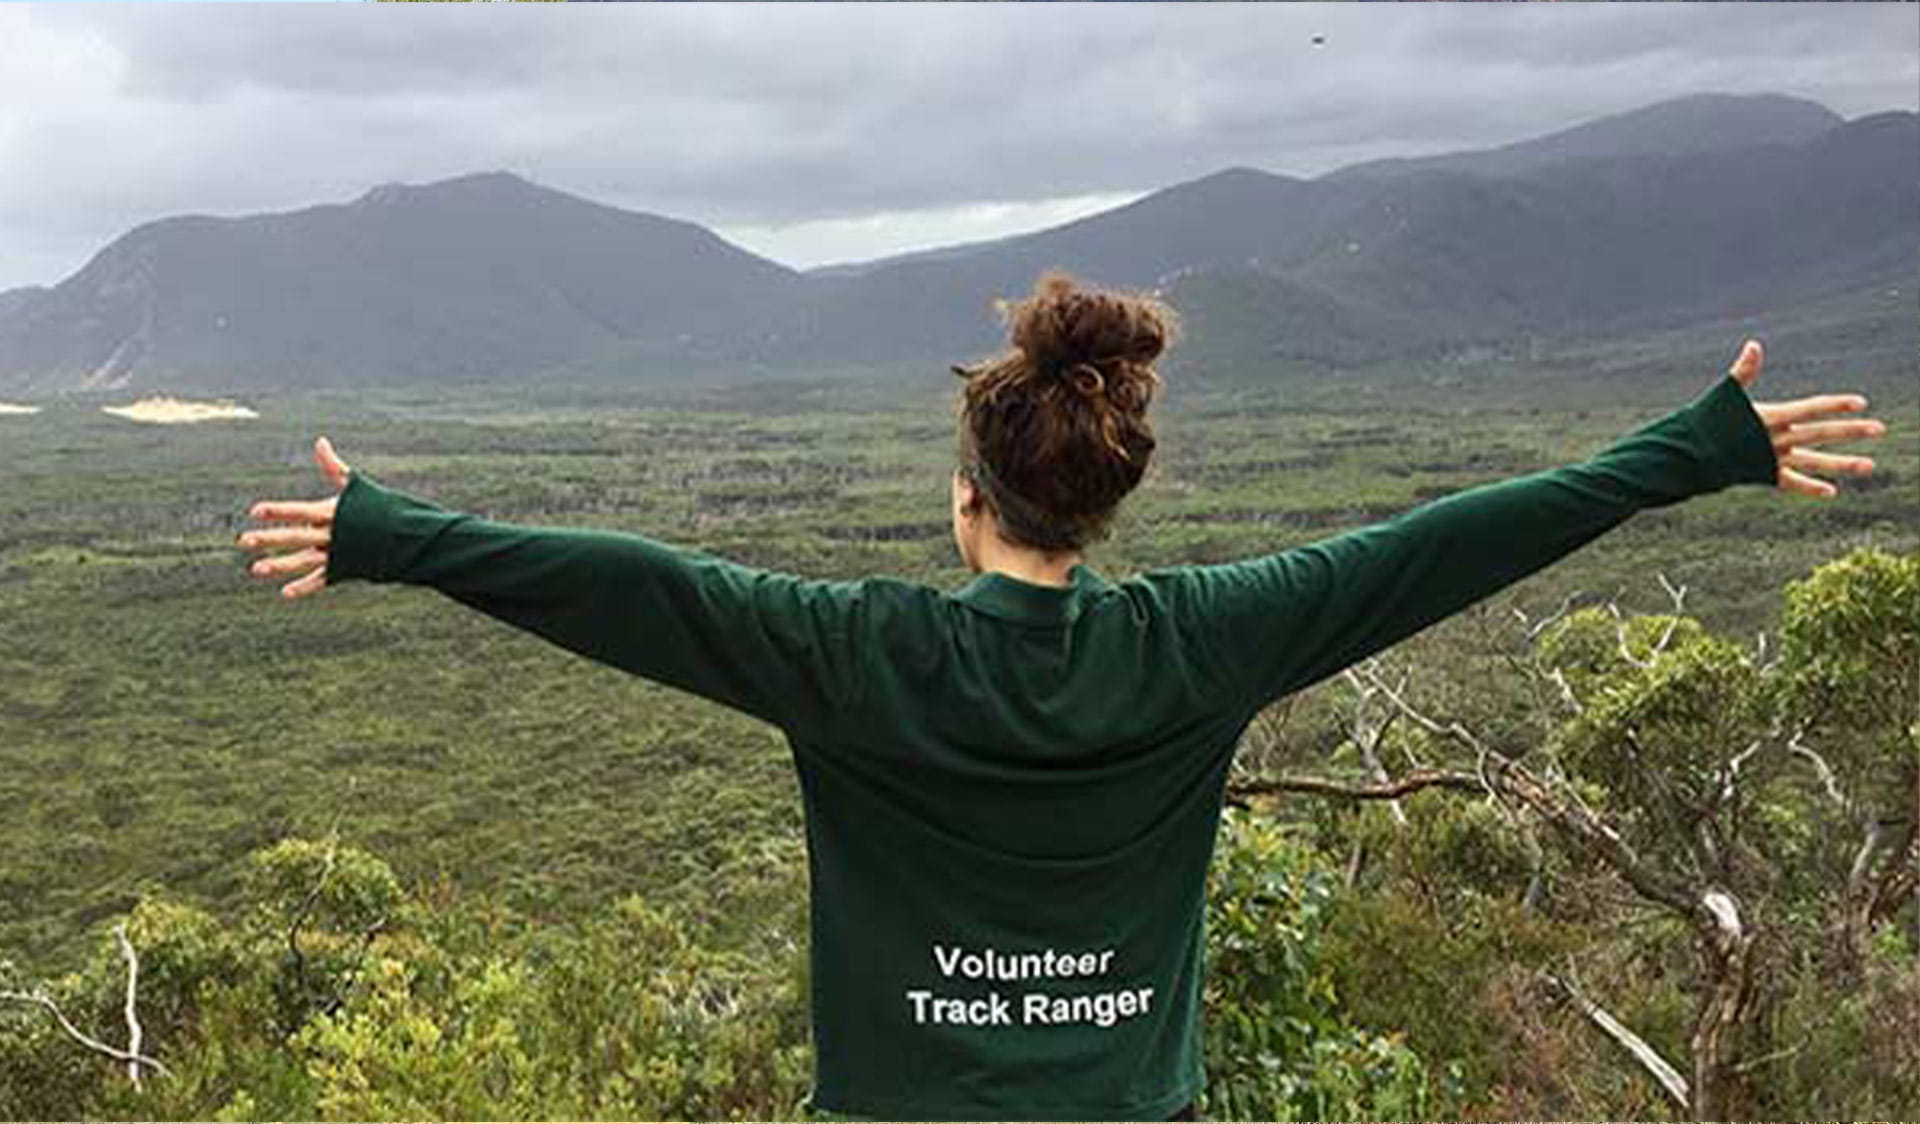 A women wearing a Volunteer Track Ranger top faces the view with her arms outstretched